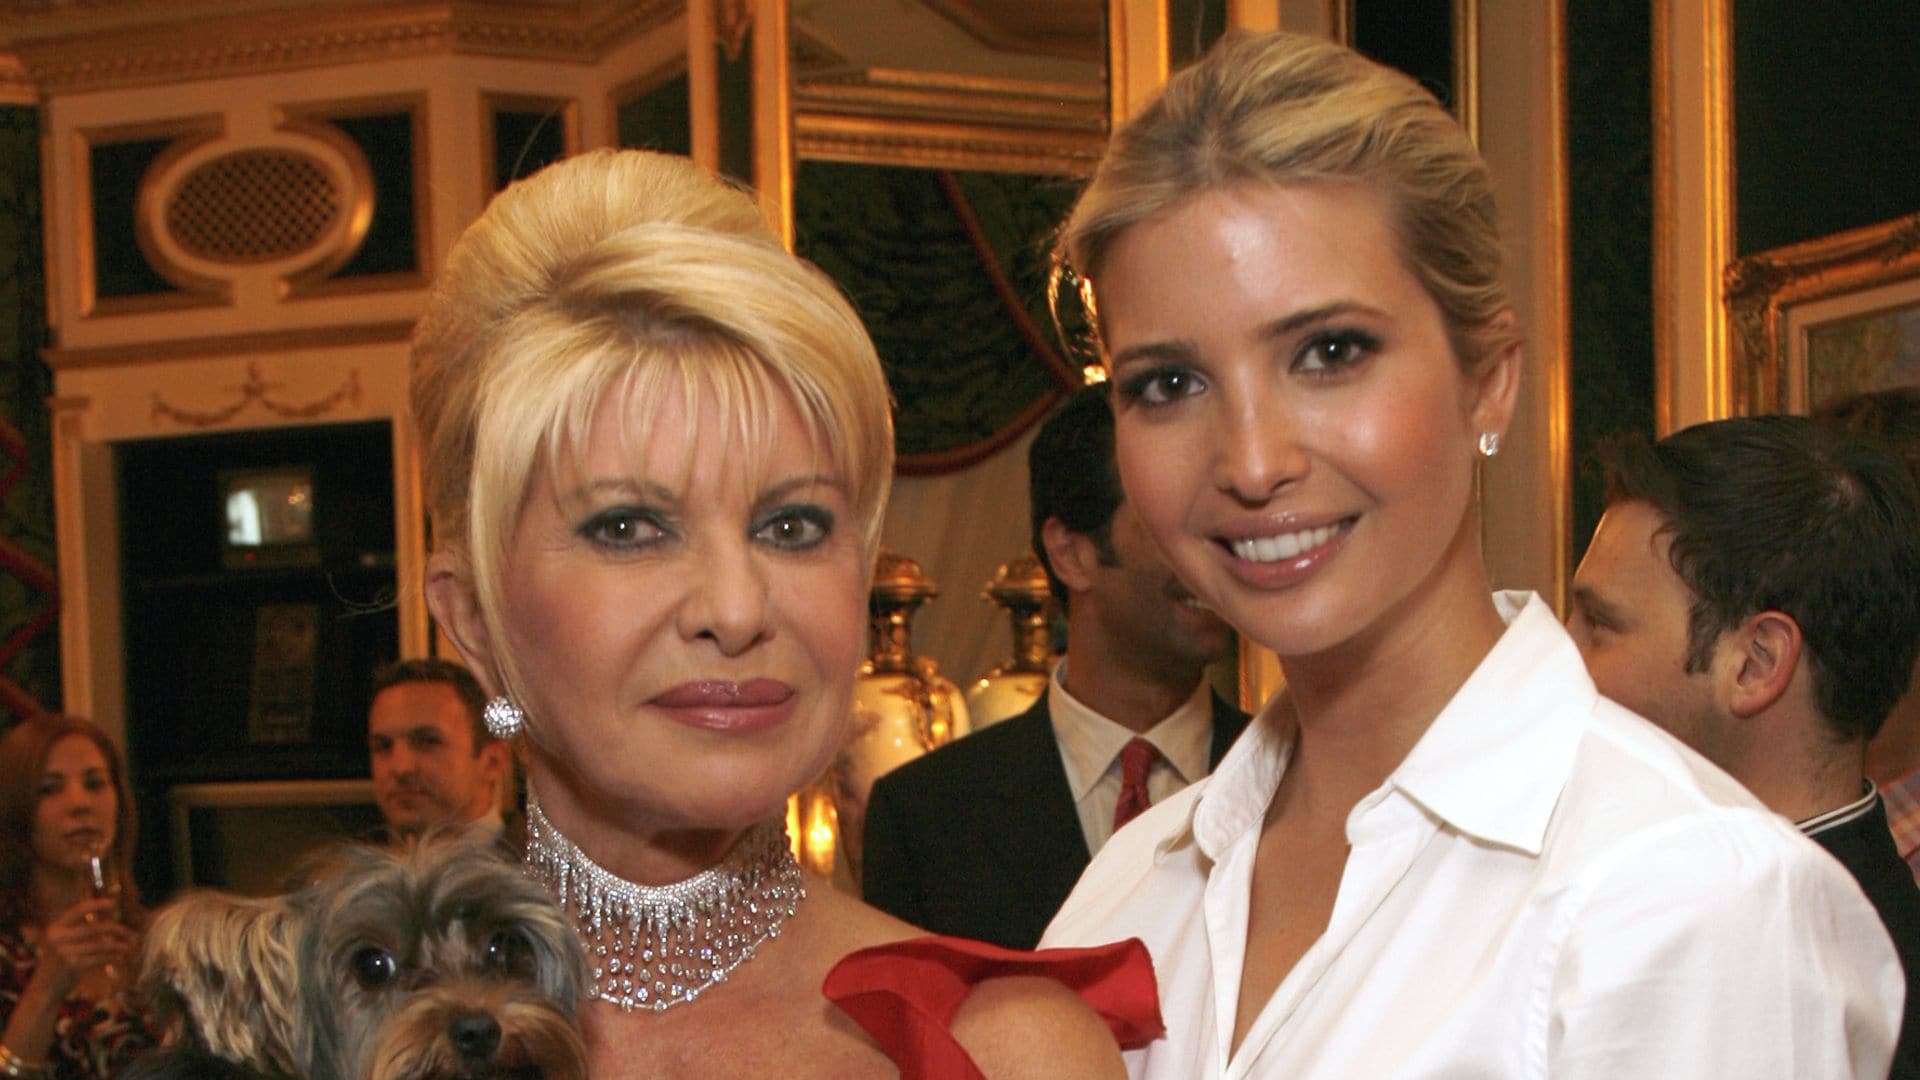 Ivanka Trump on her late mother Ivana: 'I learned from her how to enjoy life'